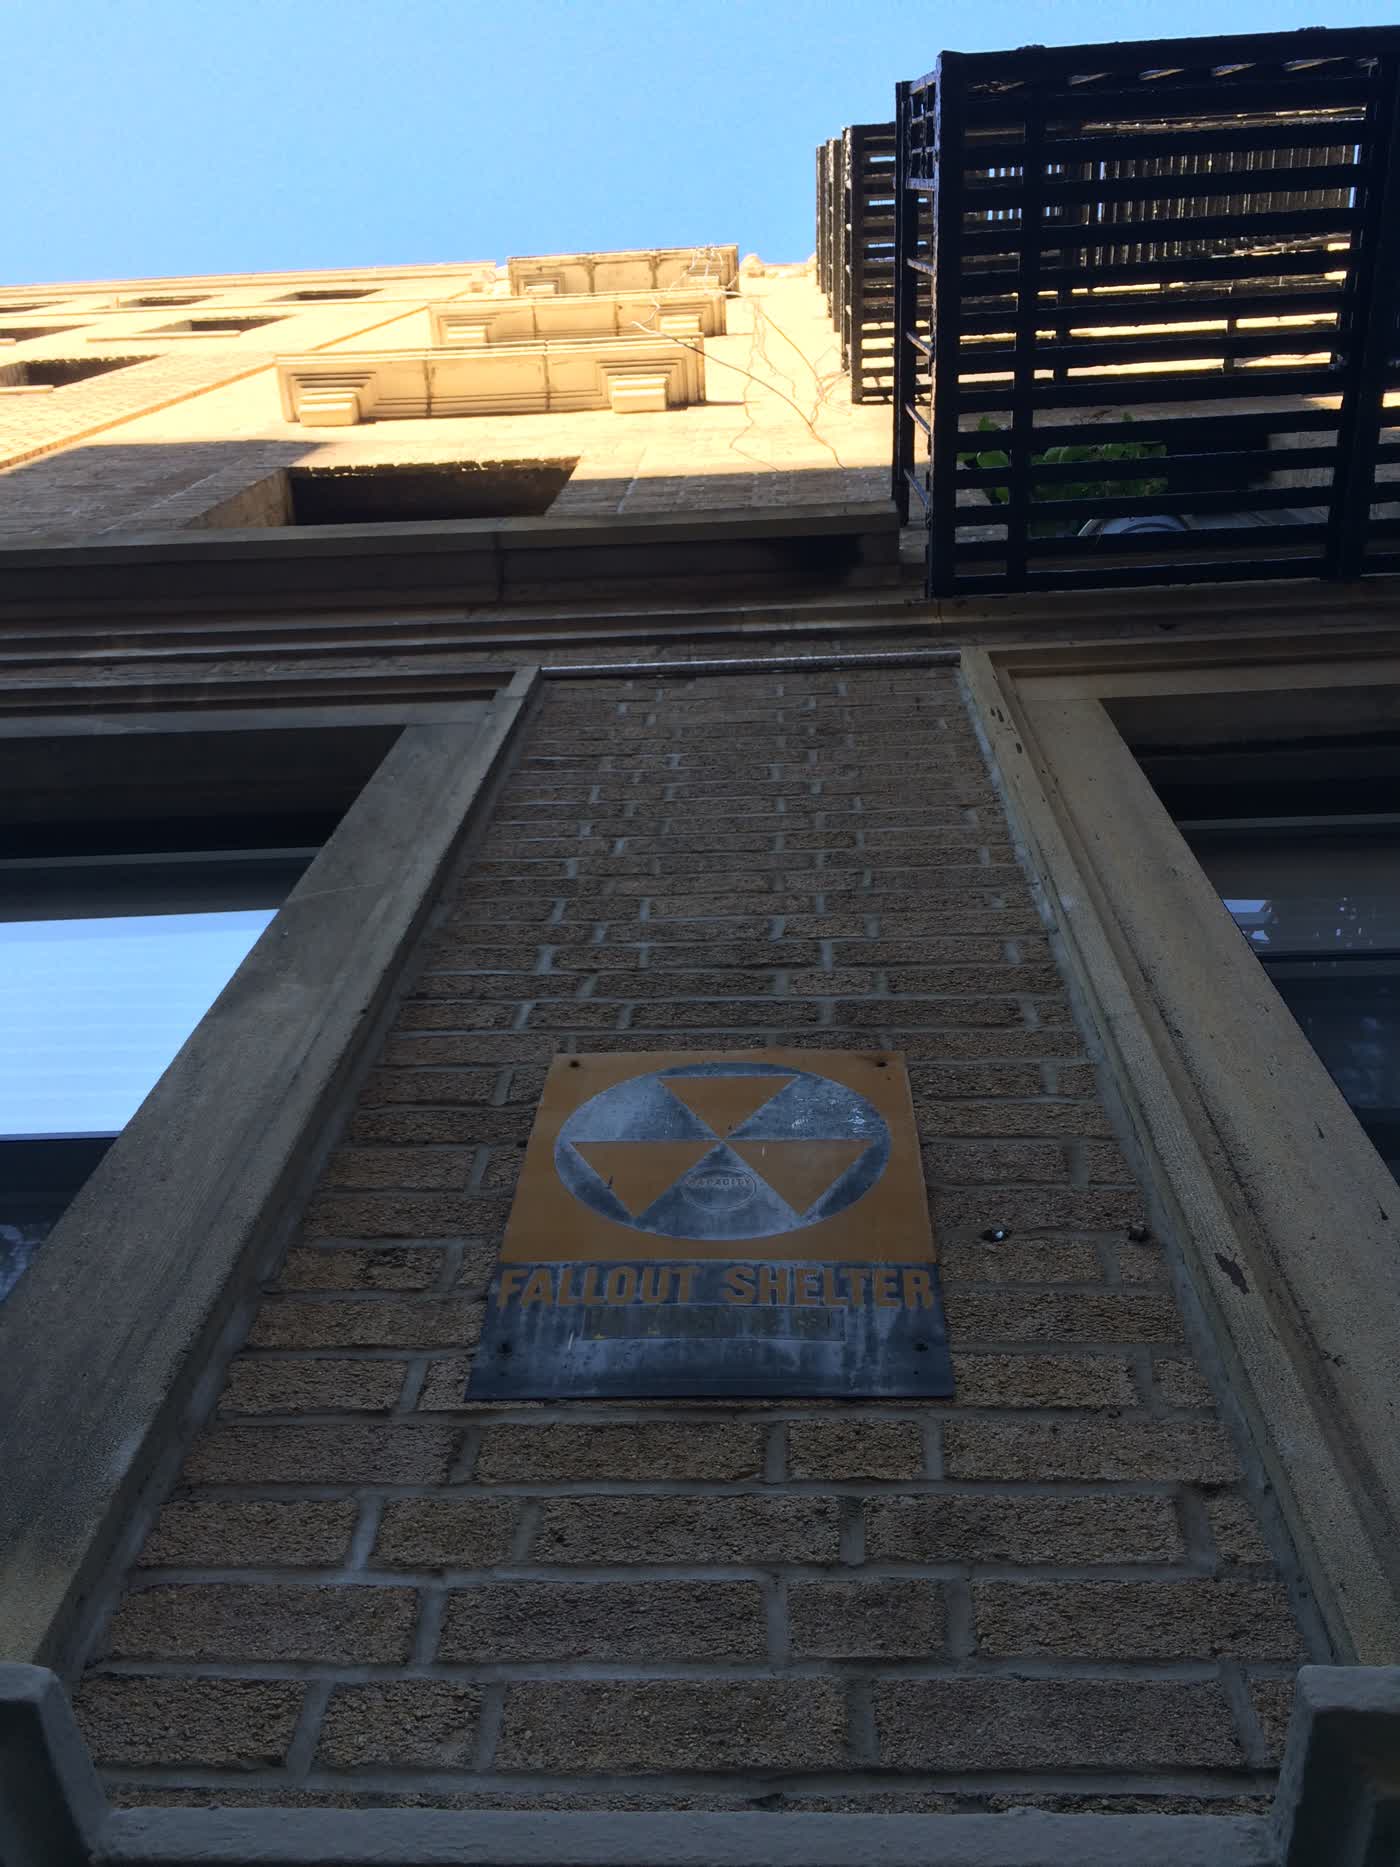 A sign reading 'Fallout Shelter' on the wall of a building.